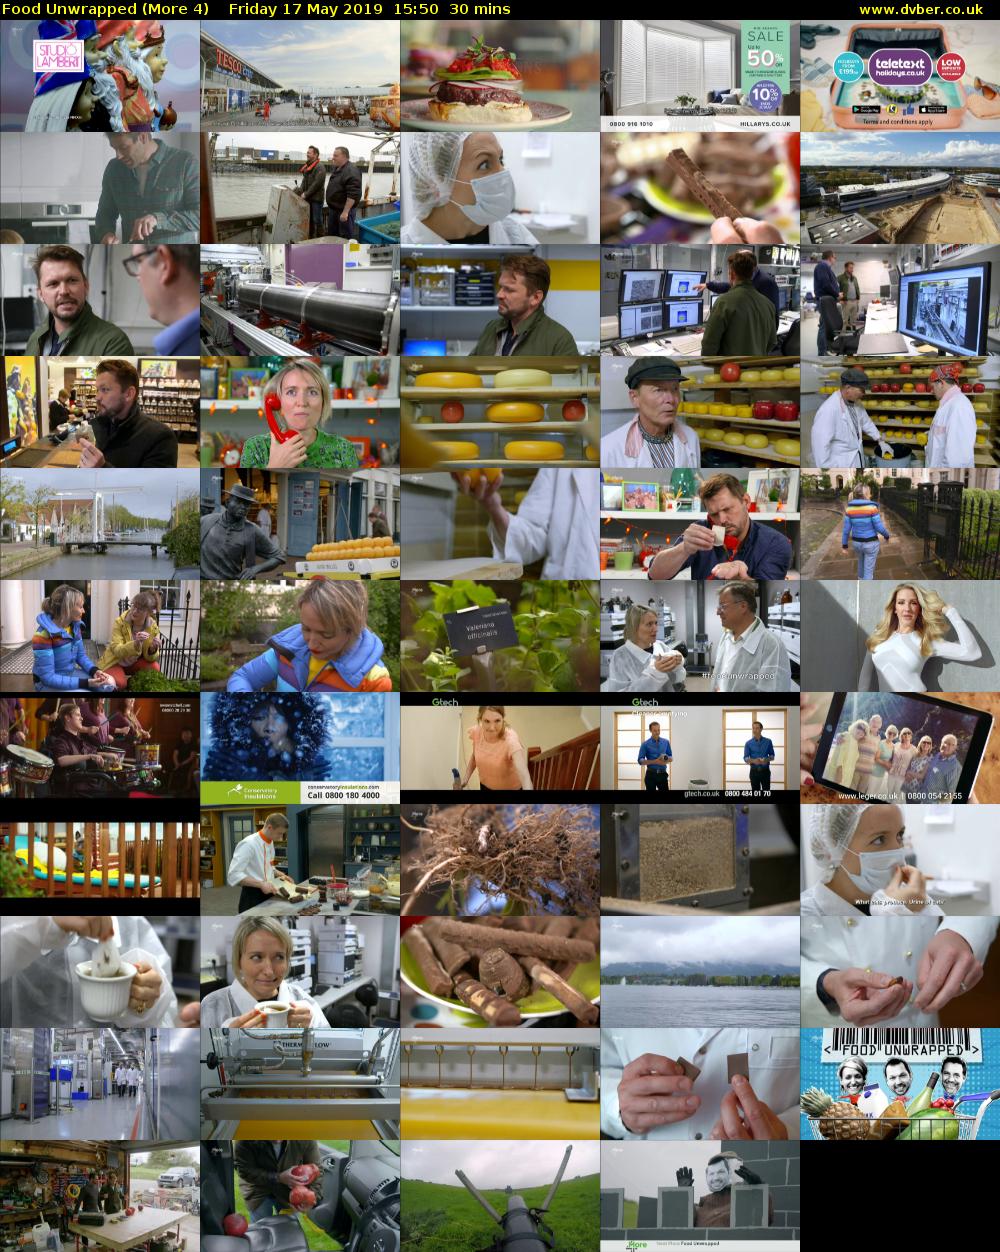 Food Unwrapped (More 4) Friday 17 May 2019 15:50 - 16:20